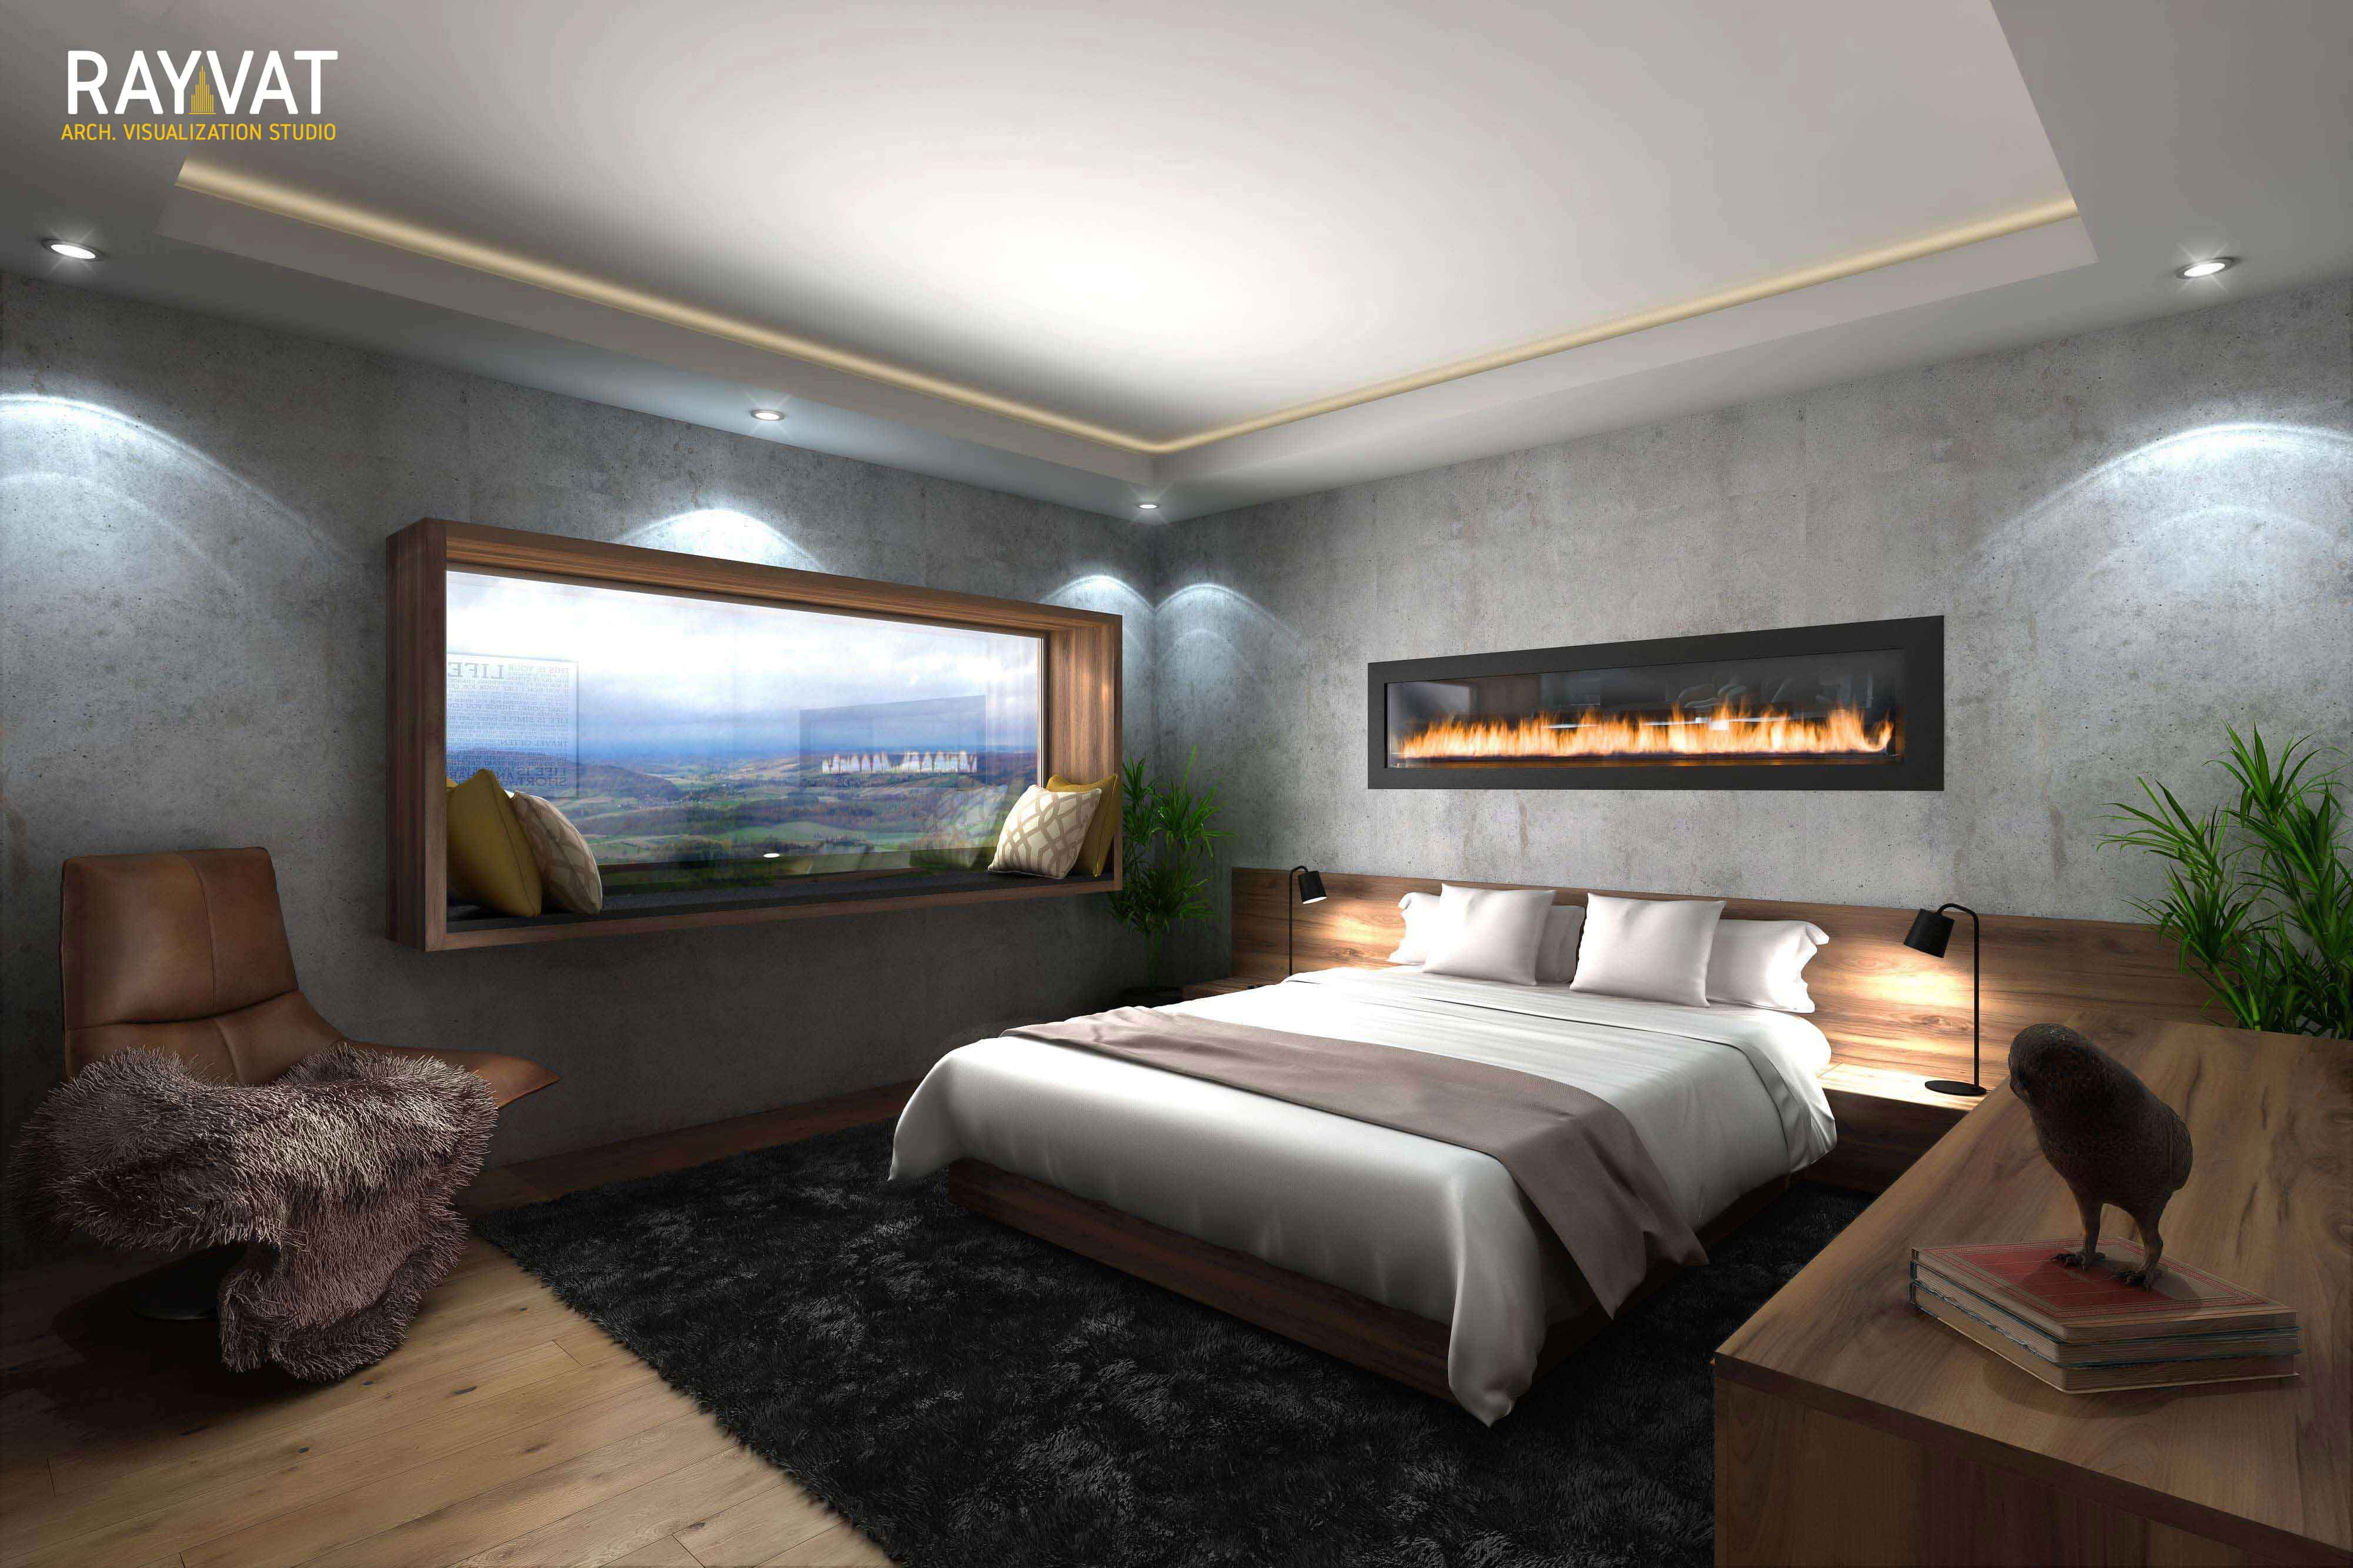  'QUIRKY, MID-CENTURY AND NATURE INSPIRED BEDROOM' - 3D INTERIOR RENDERING, SWITZERLAND